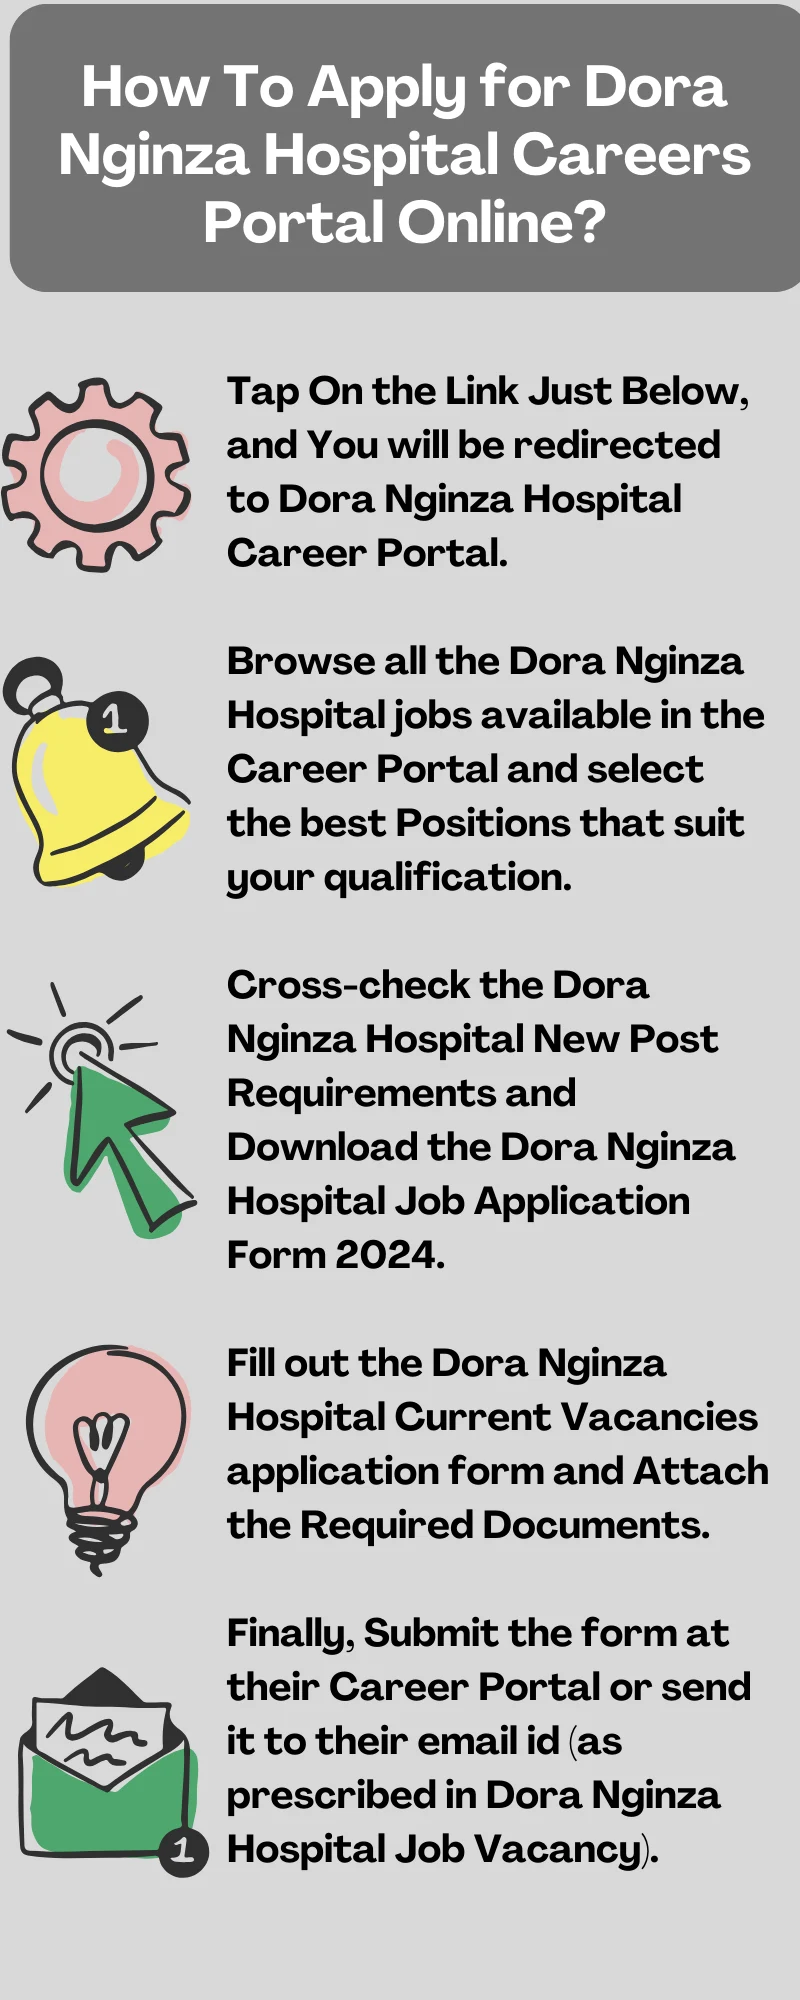 How To Apply for Dora Nginza Hospital Careers Portal Online?